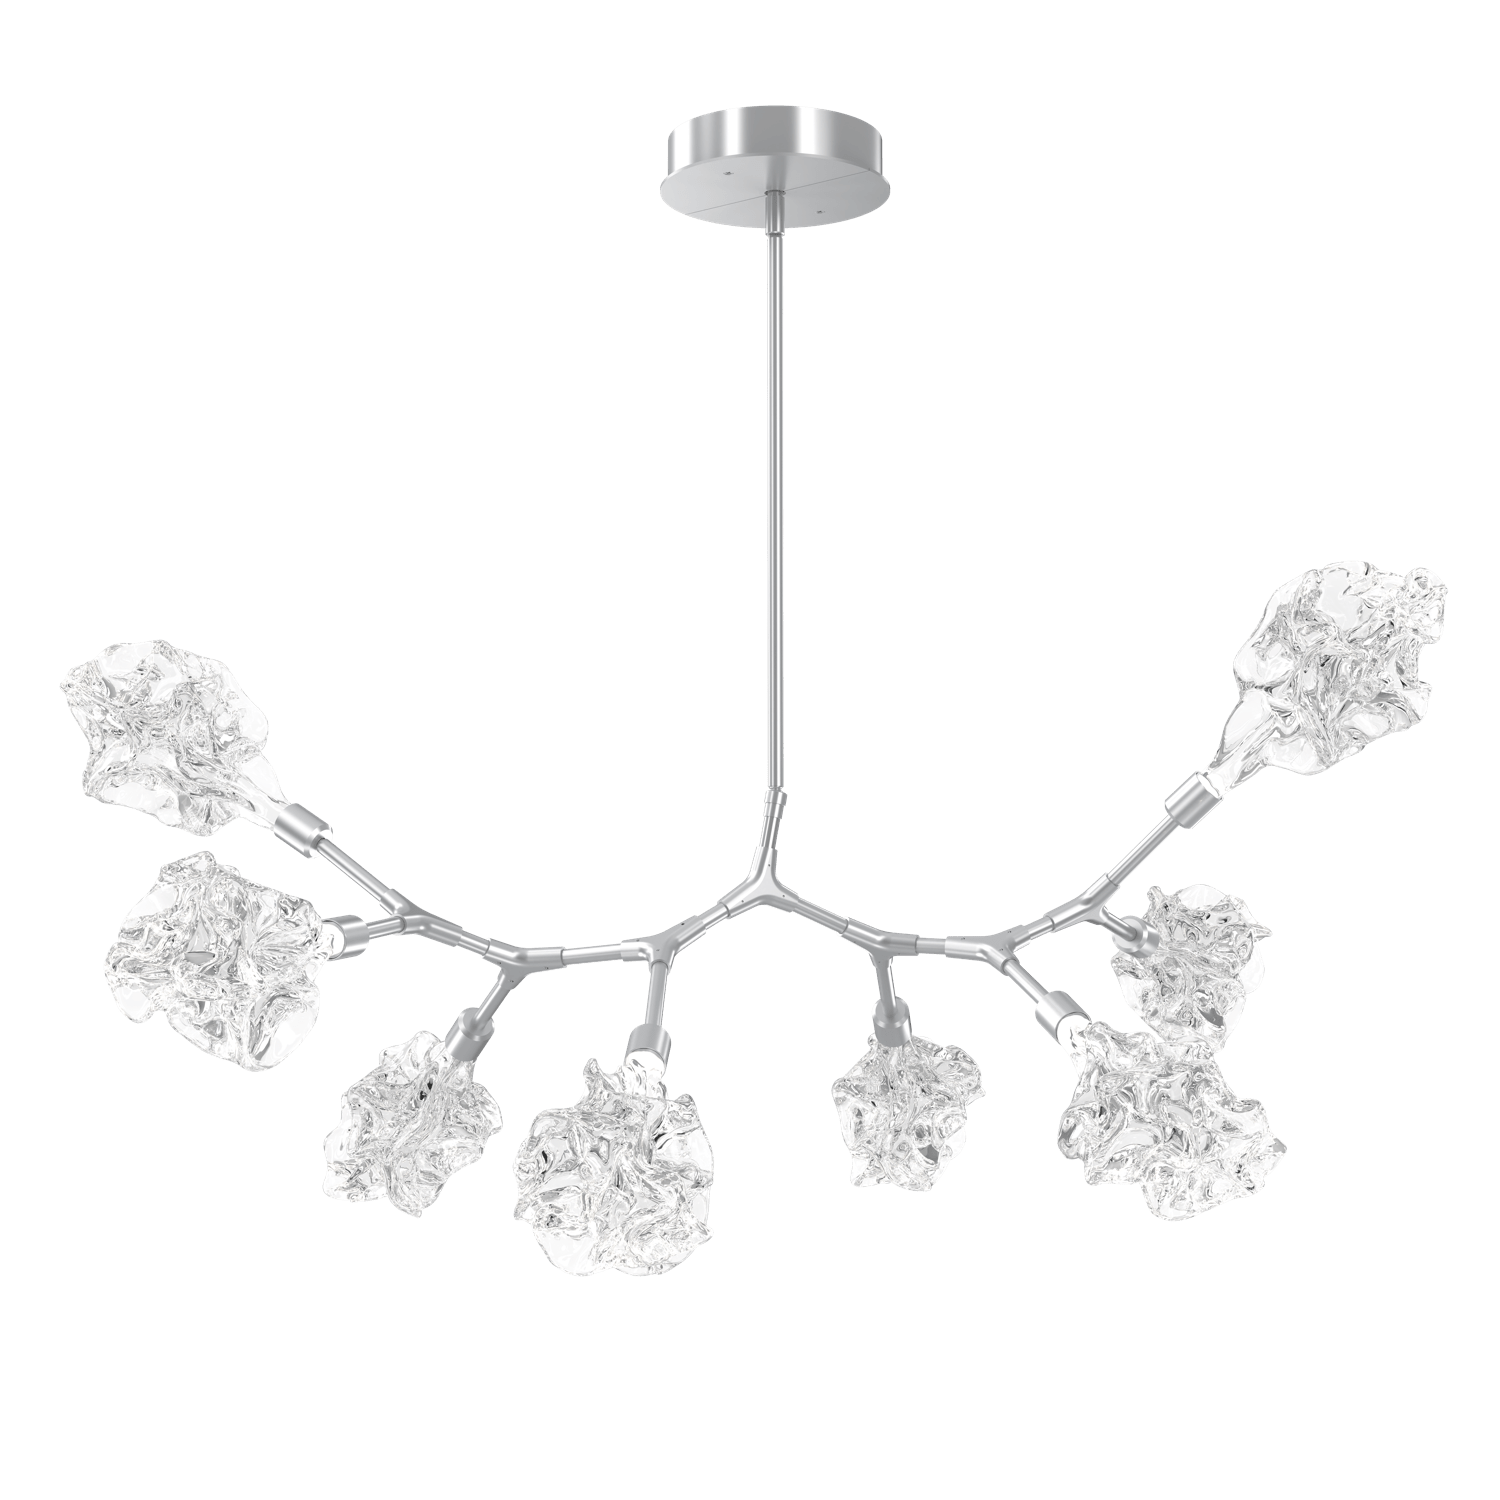 PLB0059-BB-CS-Hammerton-Studio-Blossom-8-light-organic-branch-chandelier-with-classic-silver-finish-and-clear-handblown-crystal-glass-shades-and-LED-lamping